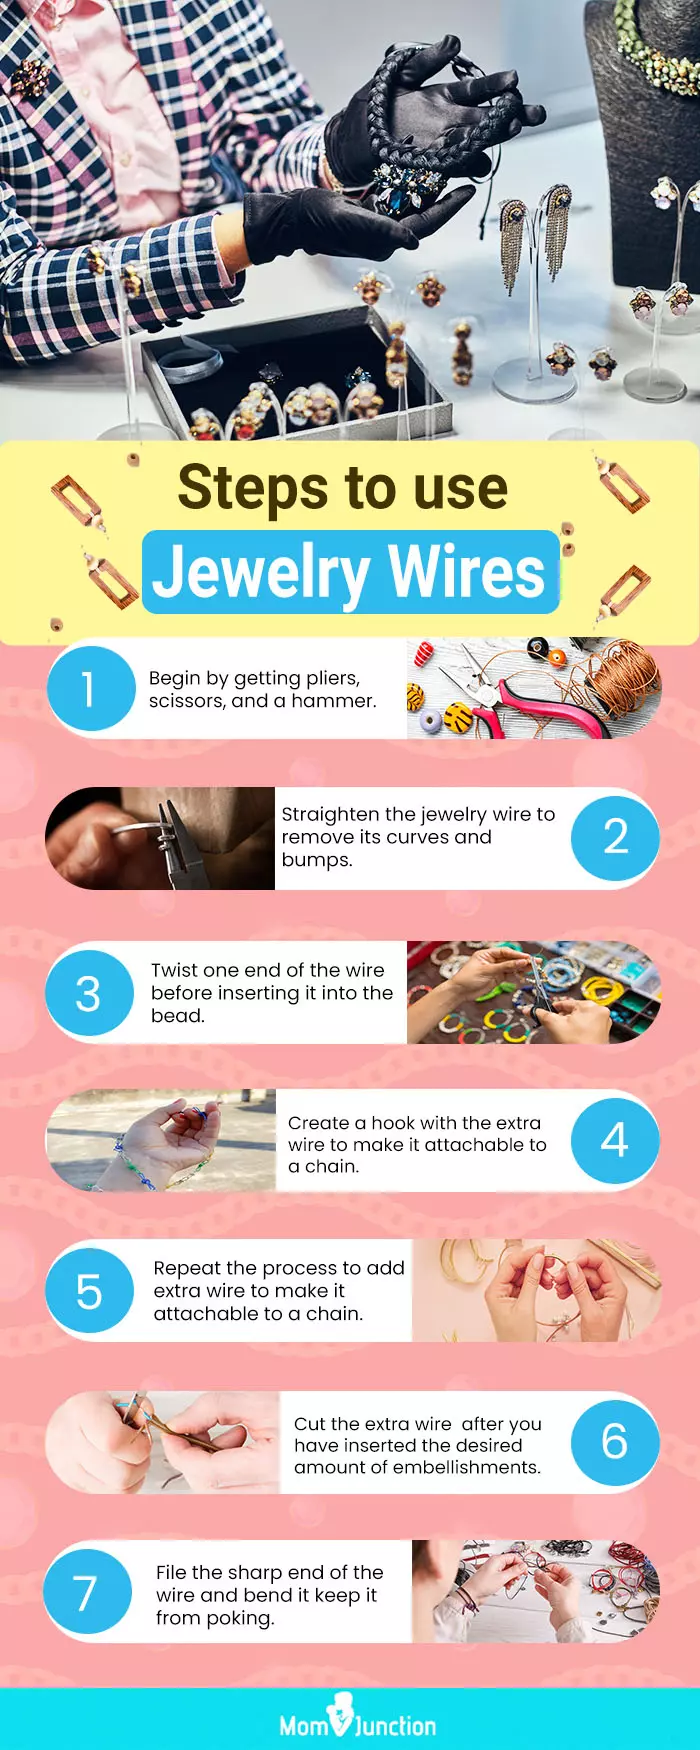 Steps To Use Jewelry Wires (infographic)